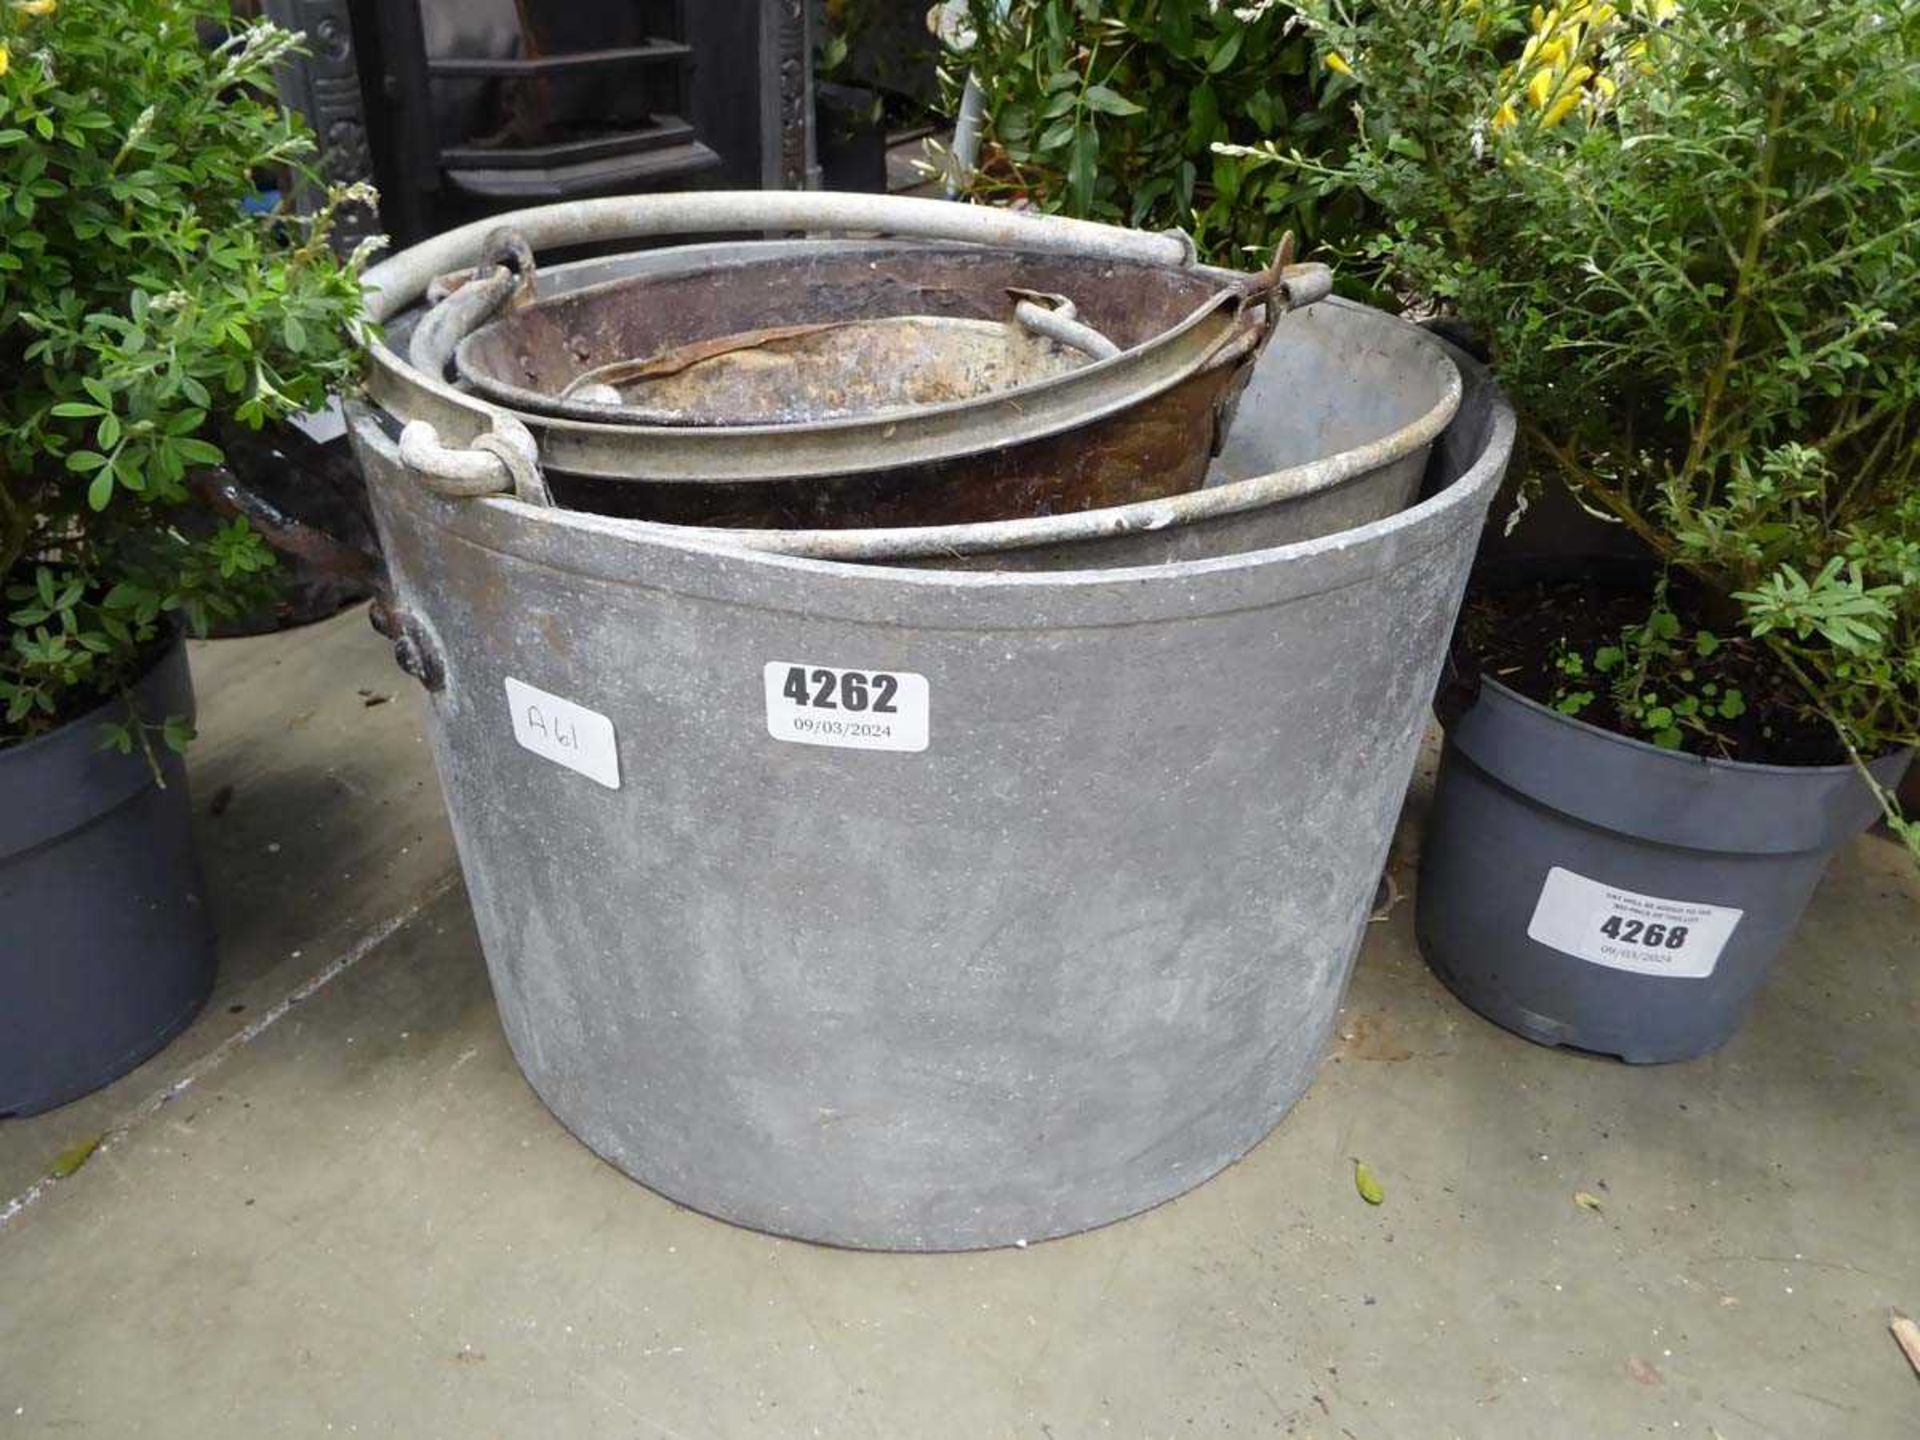 Four galvanised buckets of assorted size